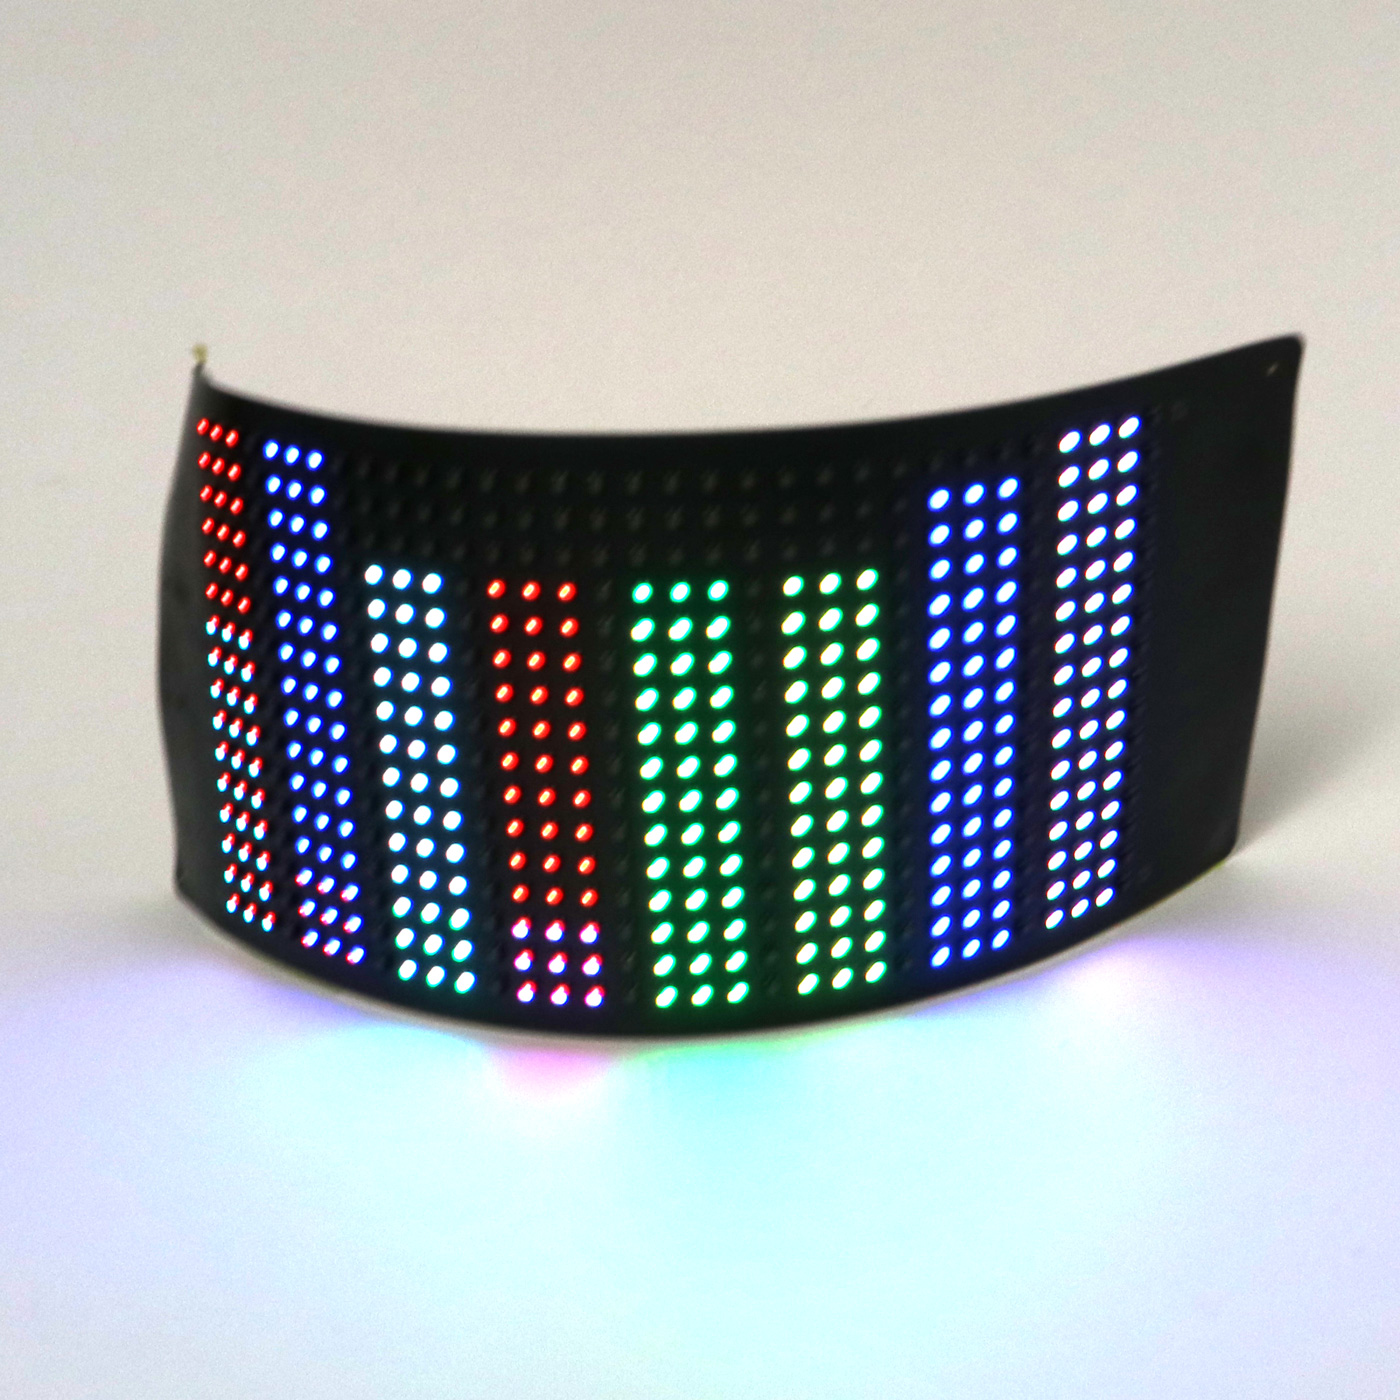 Buy Paper Thin LED Matrix Panels – Wearable Tech Tutorials and How-Tos